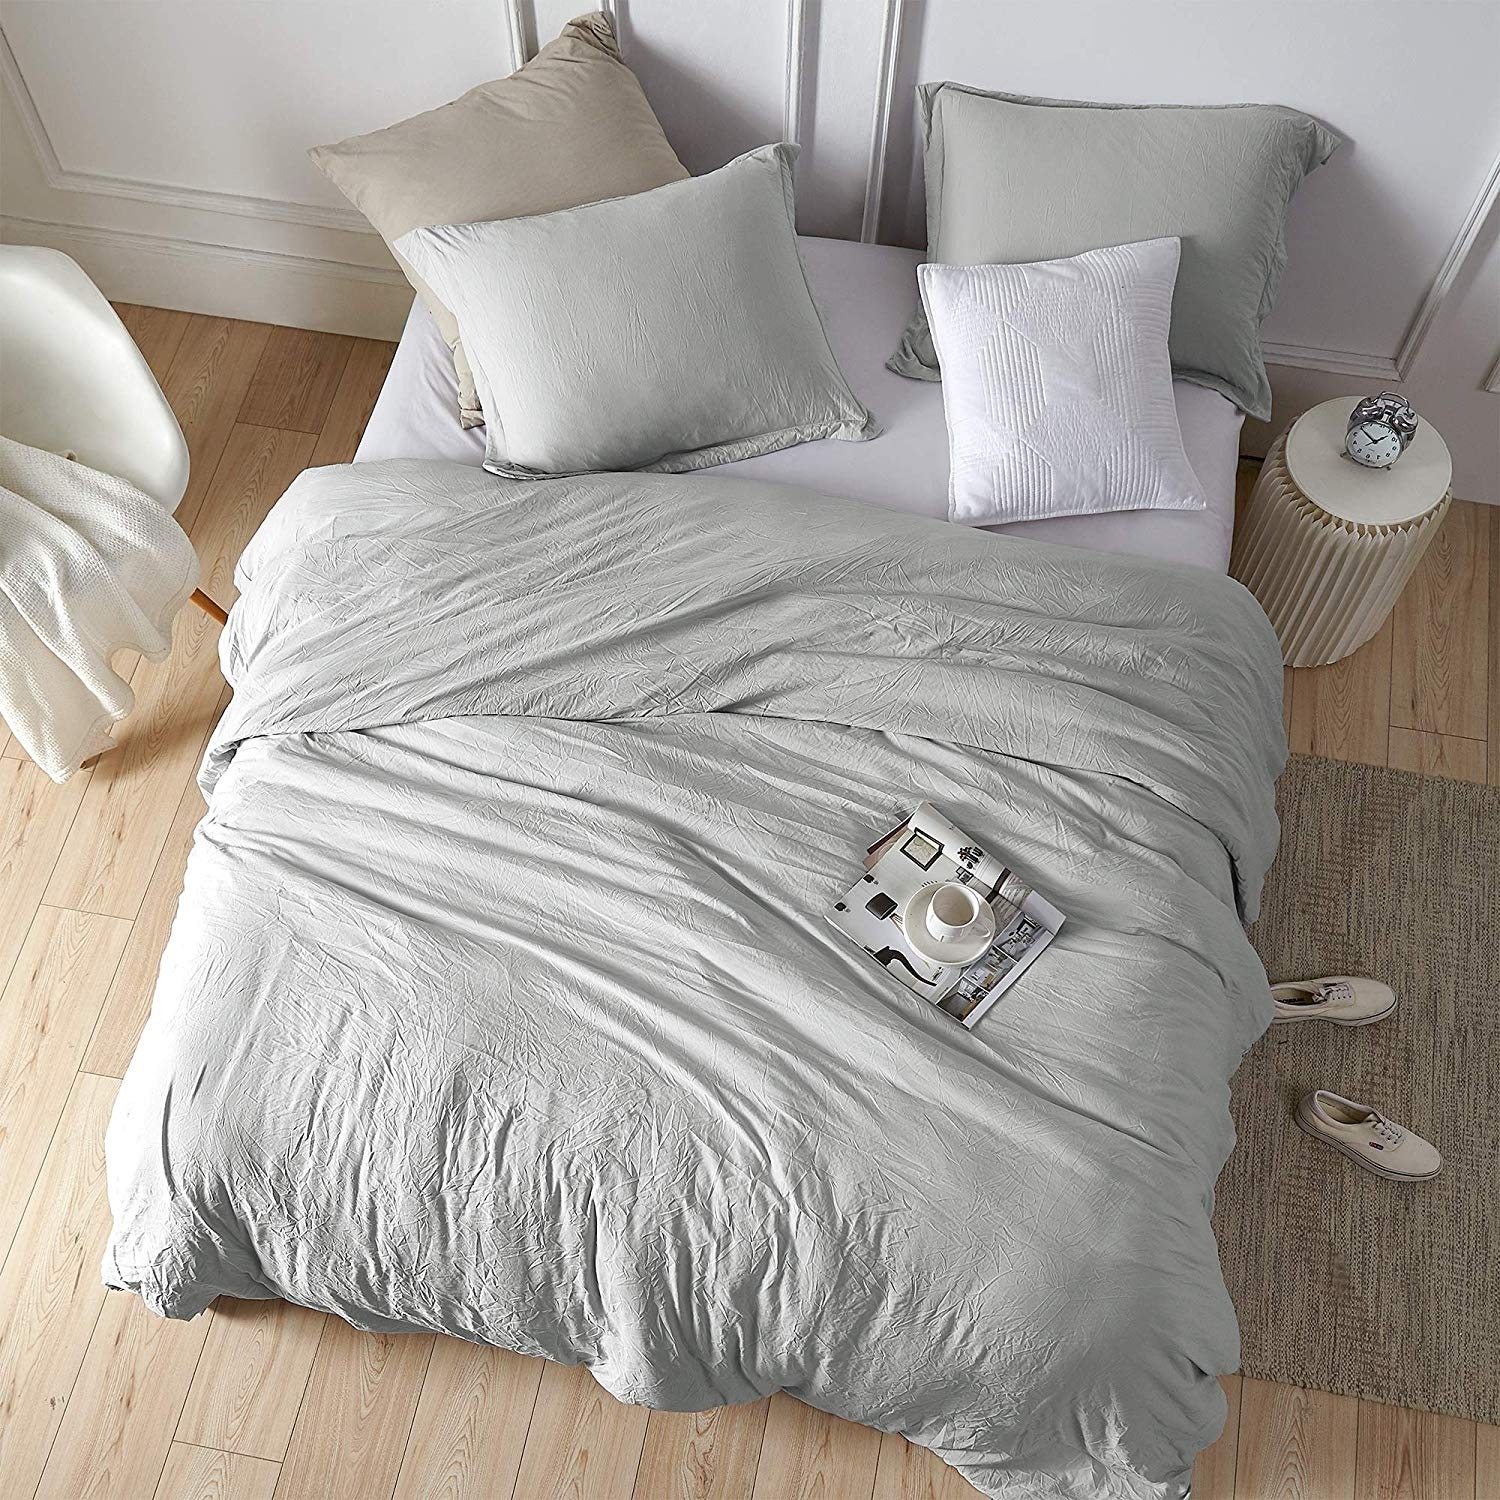 Chommie - Weighted Natural Loft Comforter - Glacier Gray 